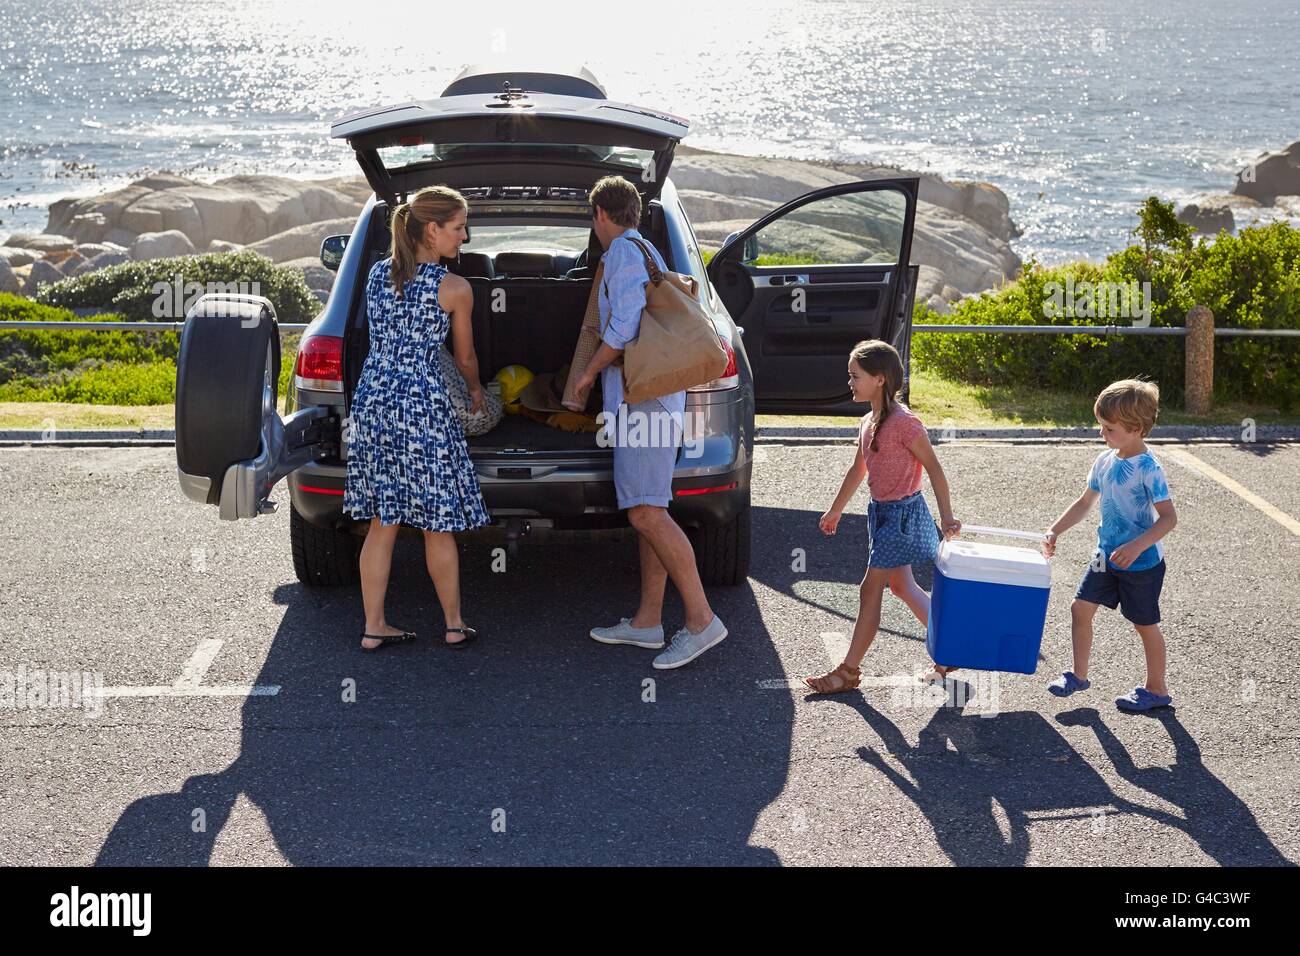 MODEL RELEASED. Family with two children unpacking the car by the beach. Stock Photo